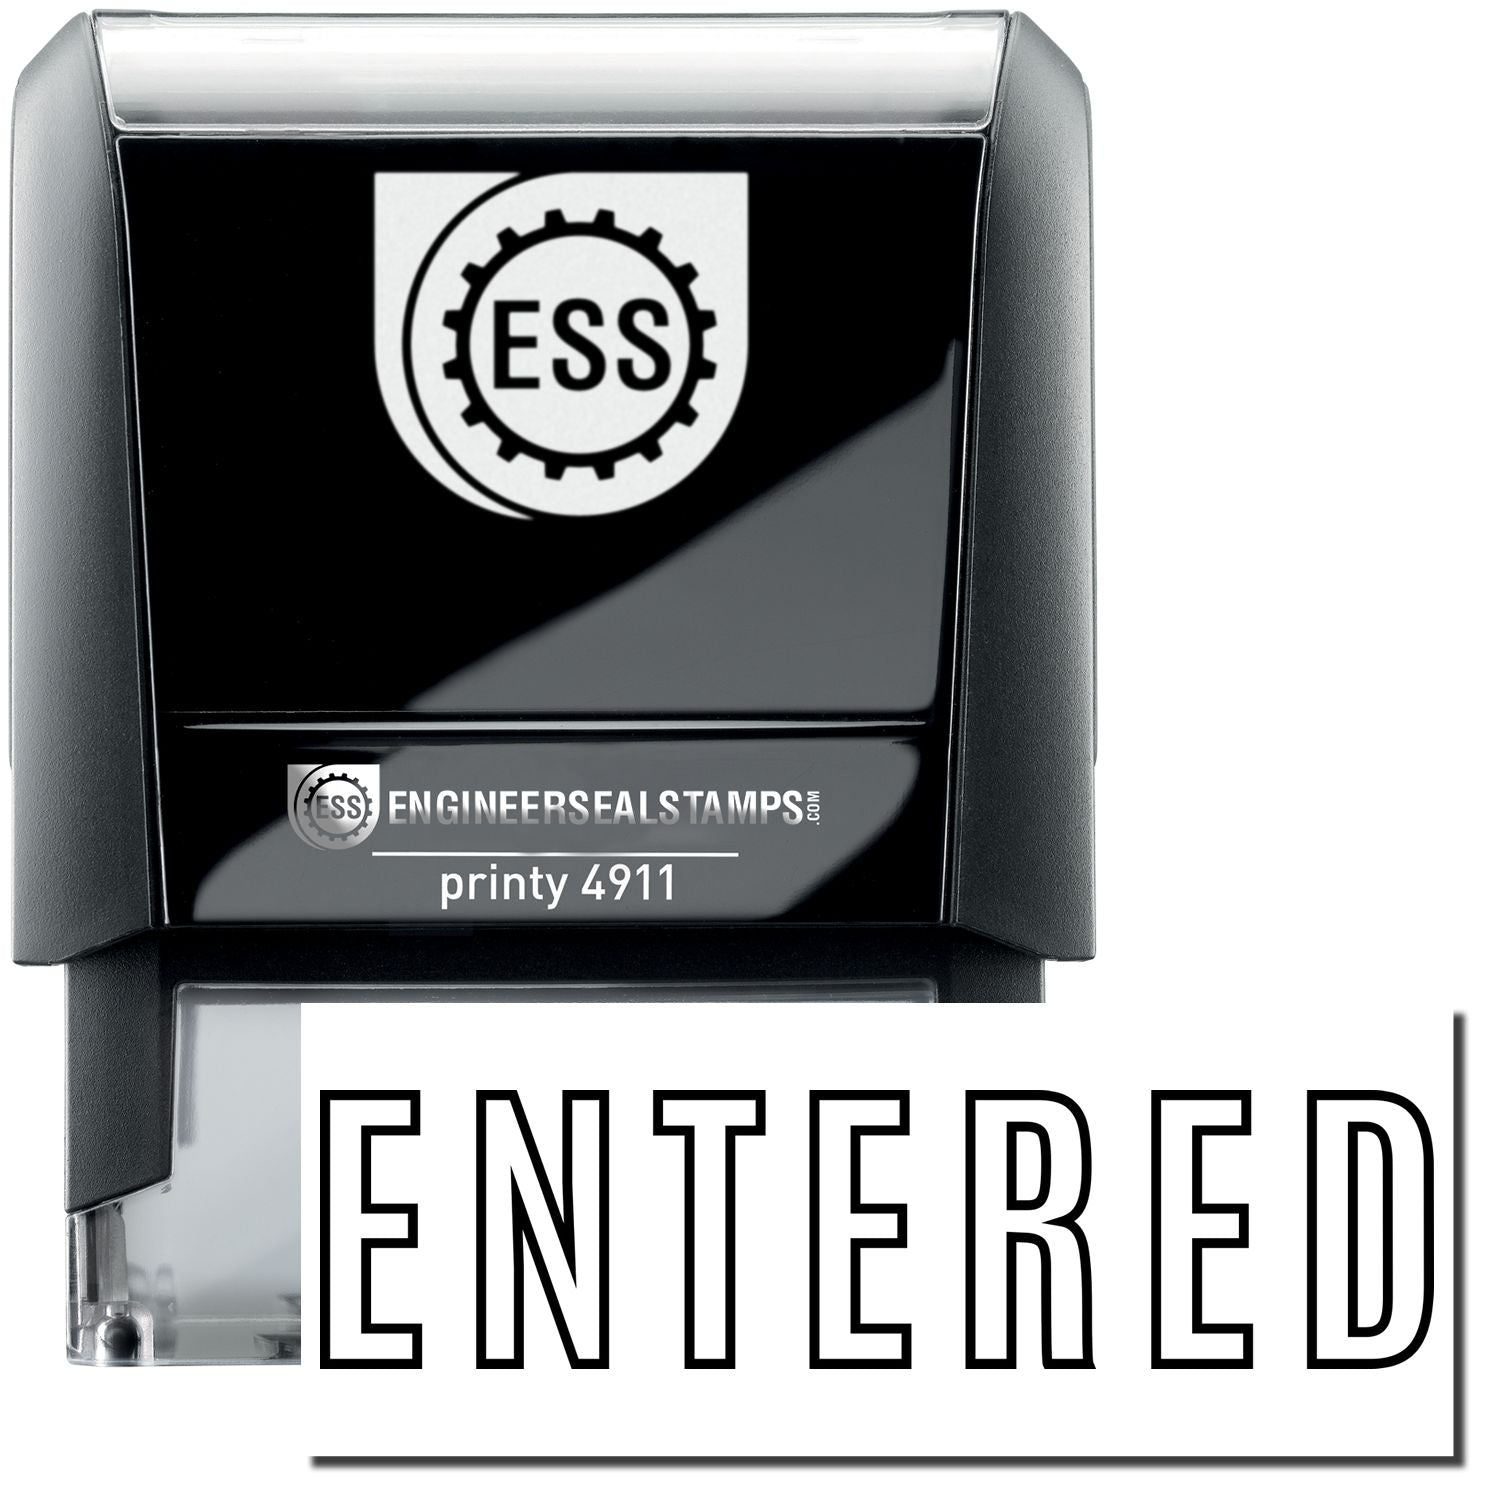 A self-inking stamp with a stamped image showing how the text "ENTERED" in an outline style is displayed after stamping.